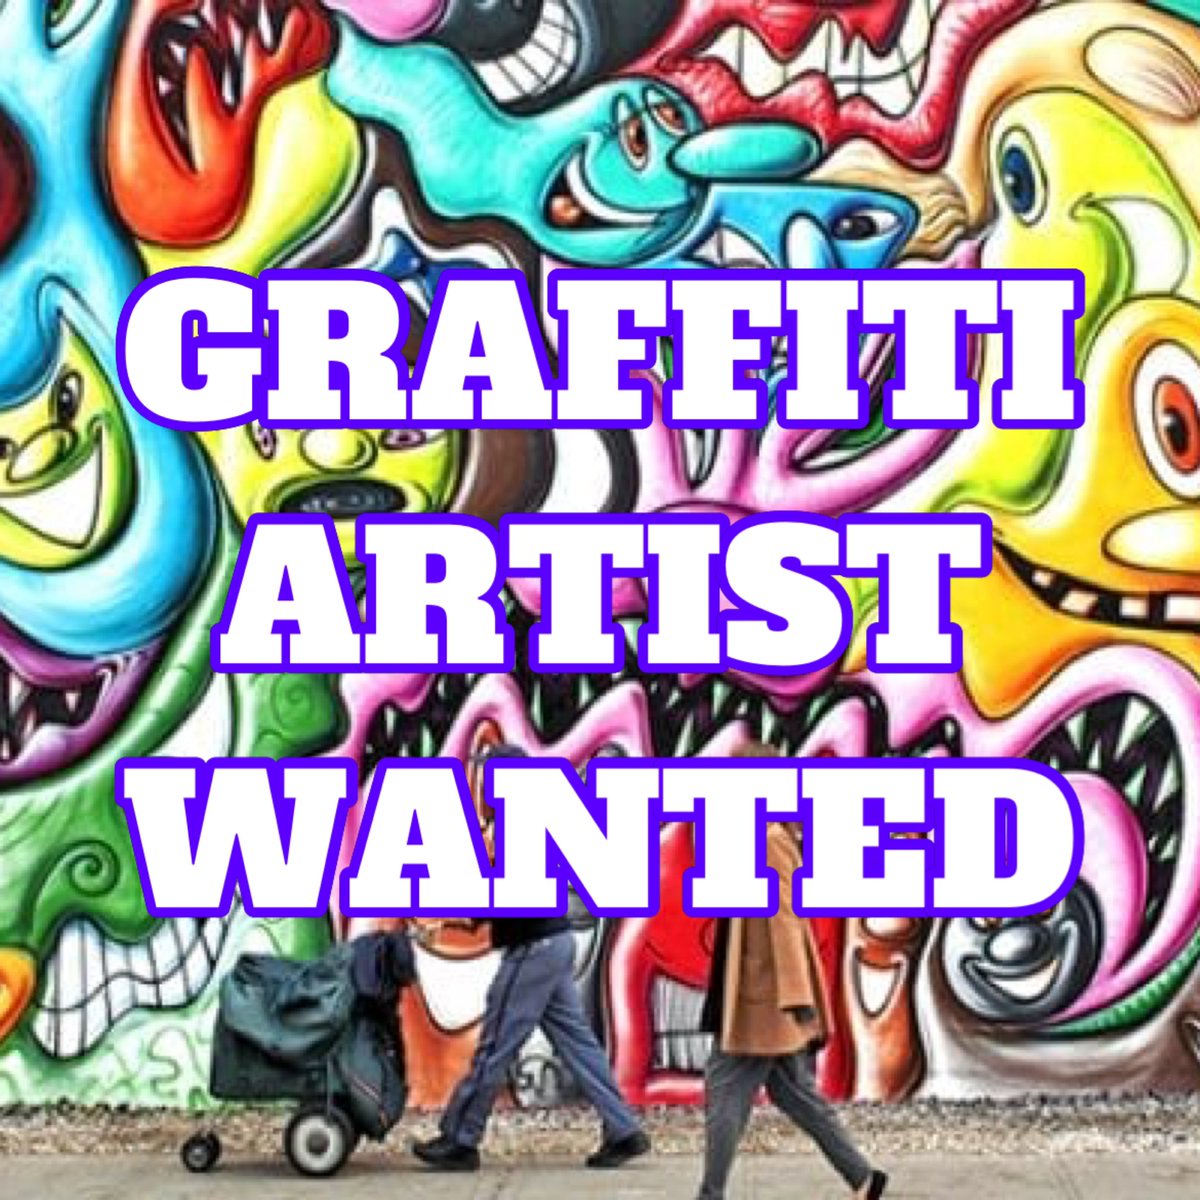 GRAFFITI ARTIST WANTED- we are looking for a Graffiti Artist to help with a school project. Please share this post or tag below to get in contact with the school.